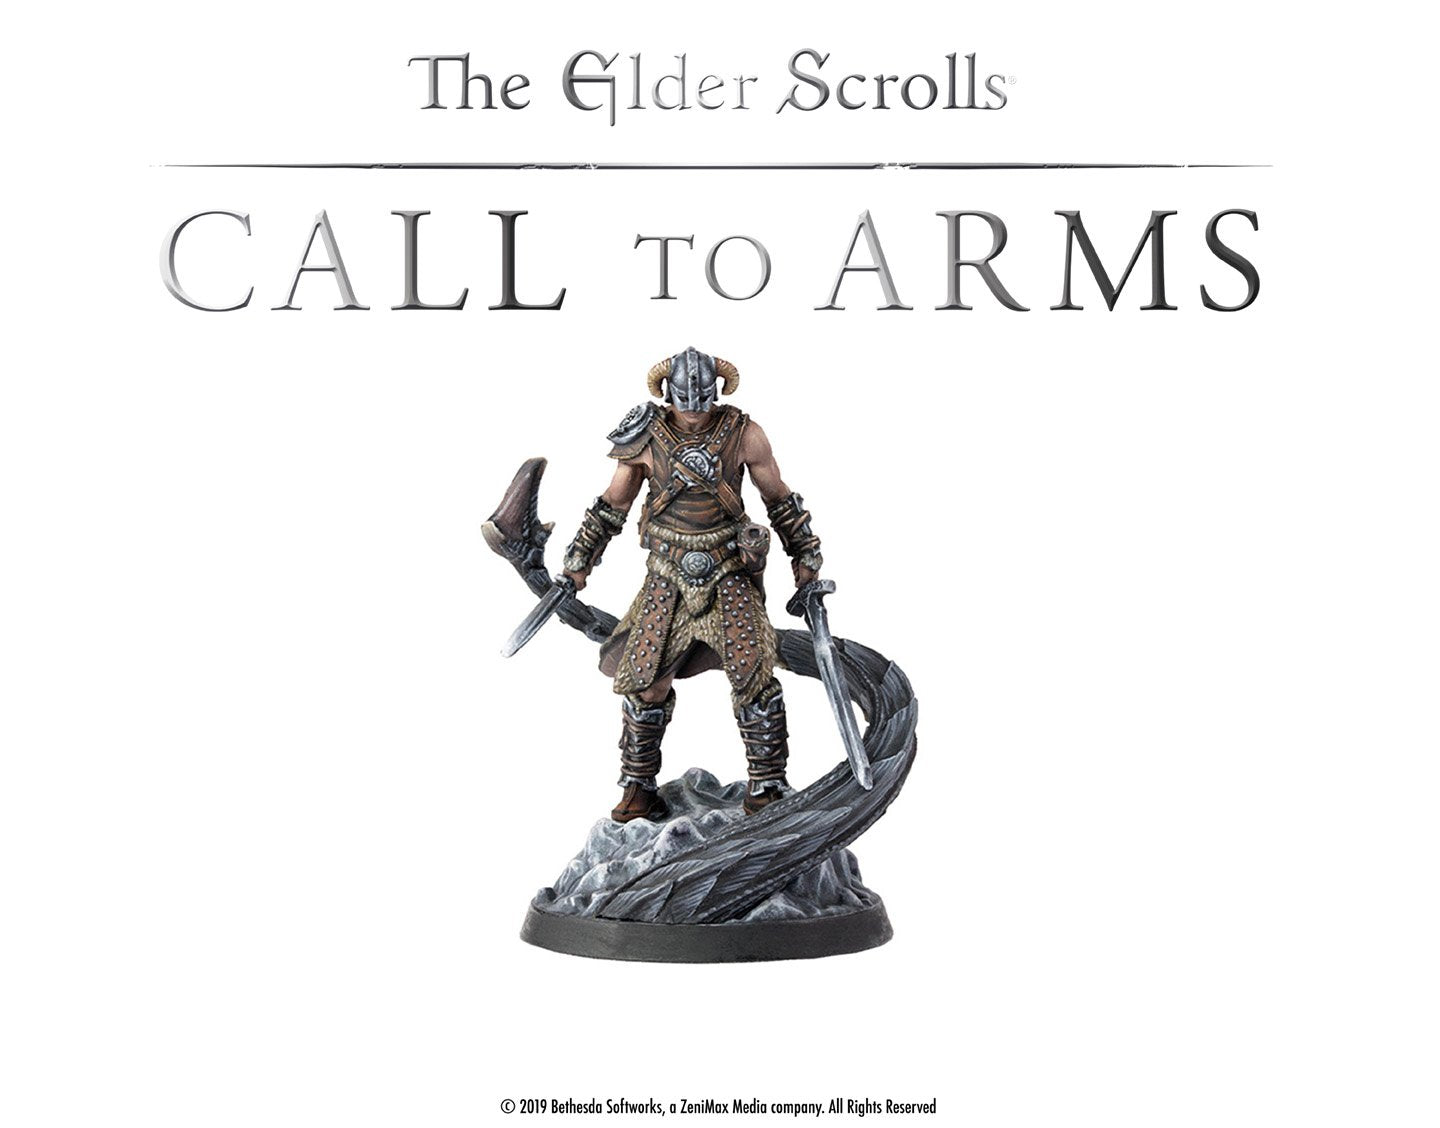 Elder Scrolls: Call to Arms bundles save up to £150 on its Skyrim sets